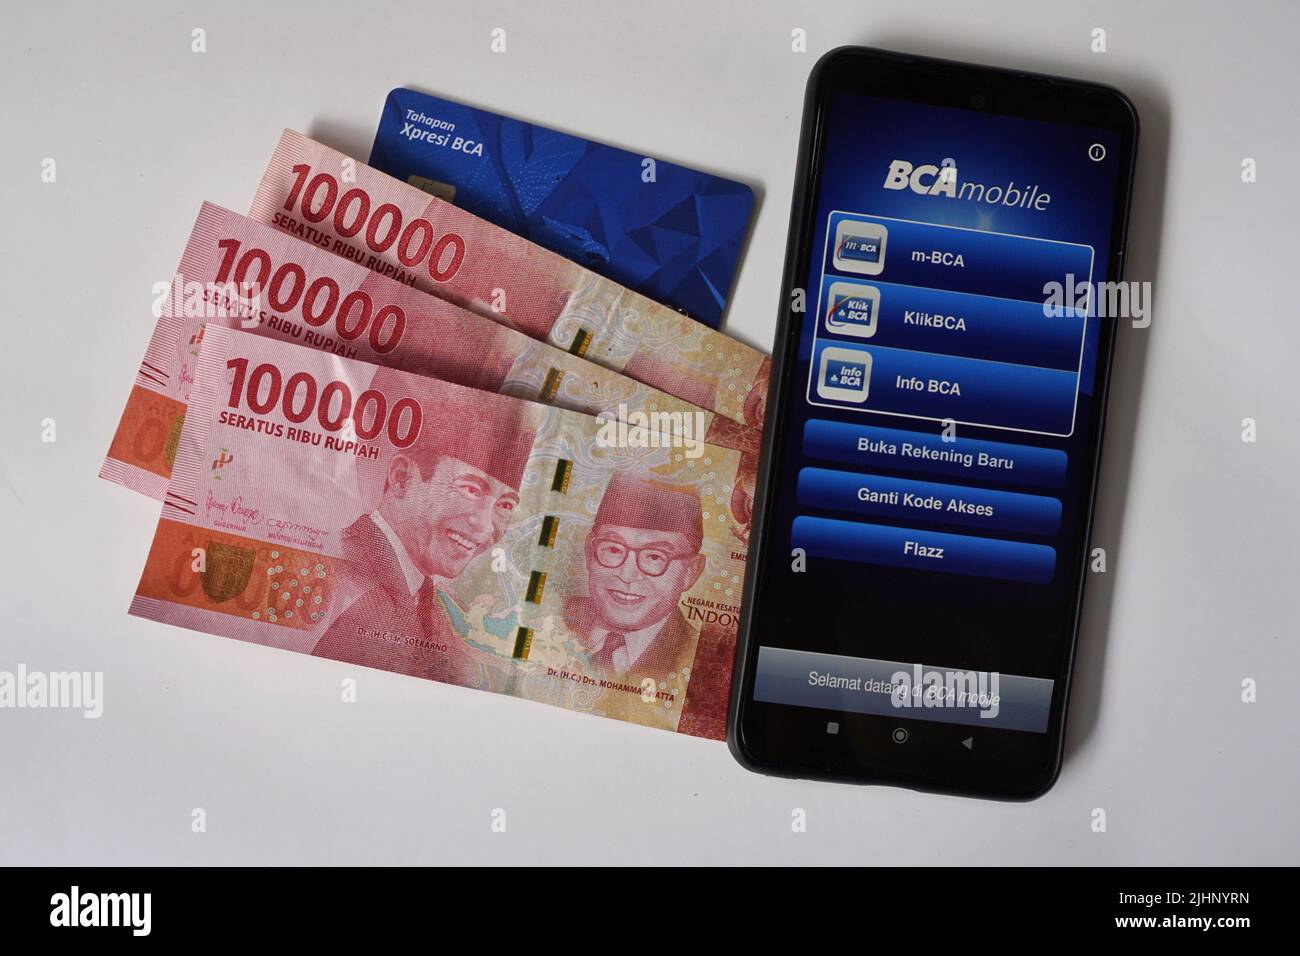 Yogyakarta, Indonesia - July 10th, 2022. Pictures of Bank BCA accounts book, ATM Card and mobile banking on a smartphone called m-BCA. Stock Photo